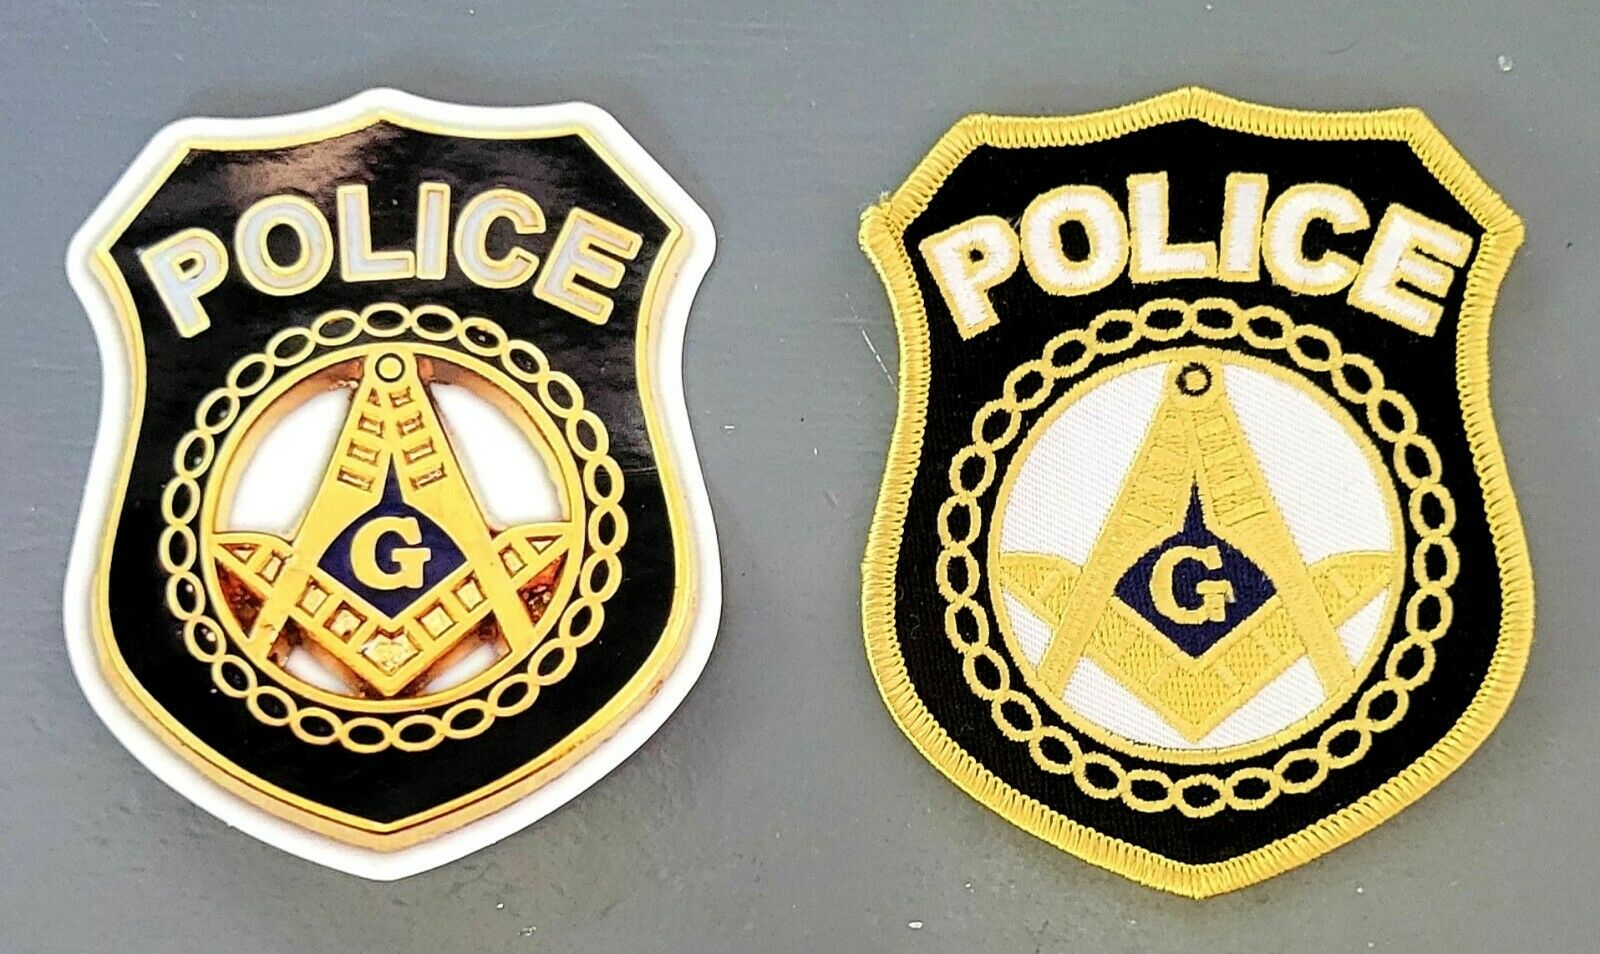 Masonic Police Patches, Master Mason Patch With Police Style, Masonic Patch